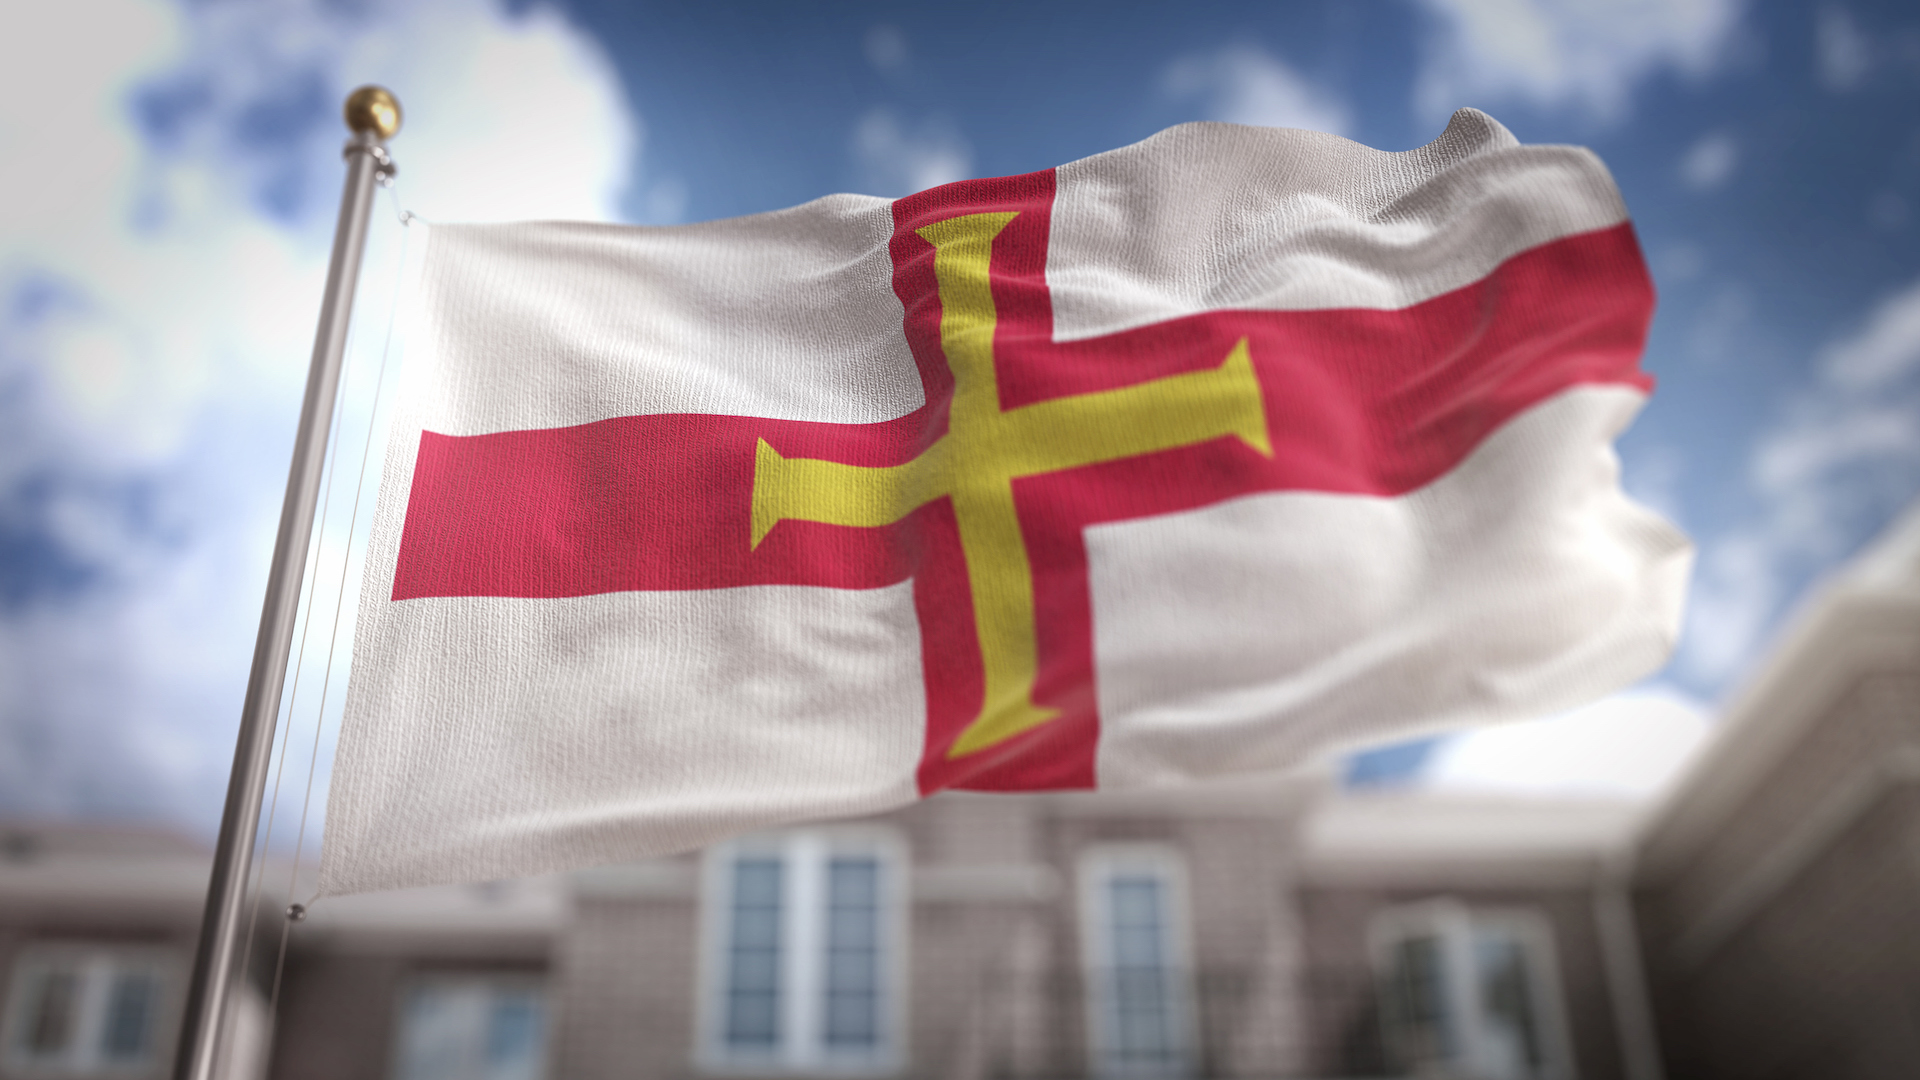 A Guernsey flag fluttering in the wind